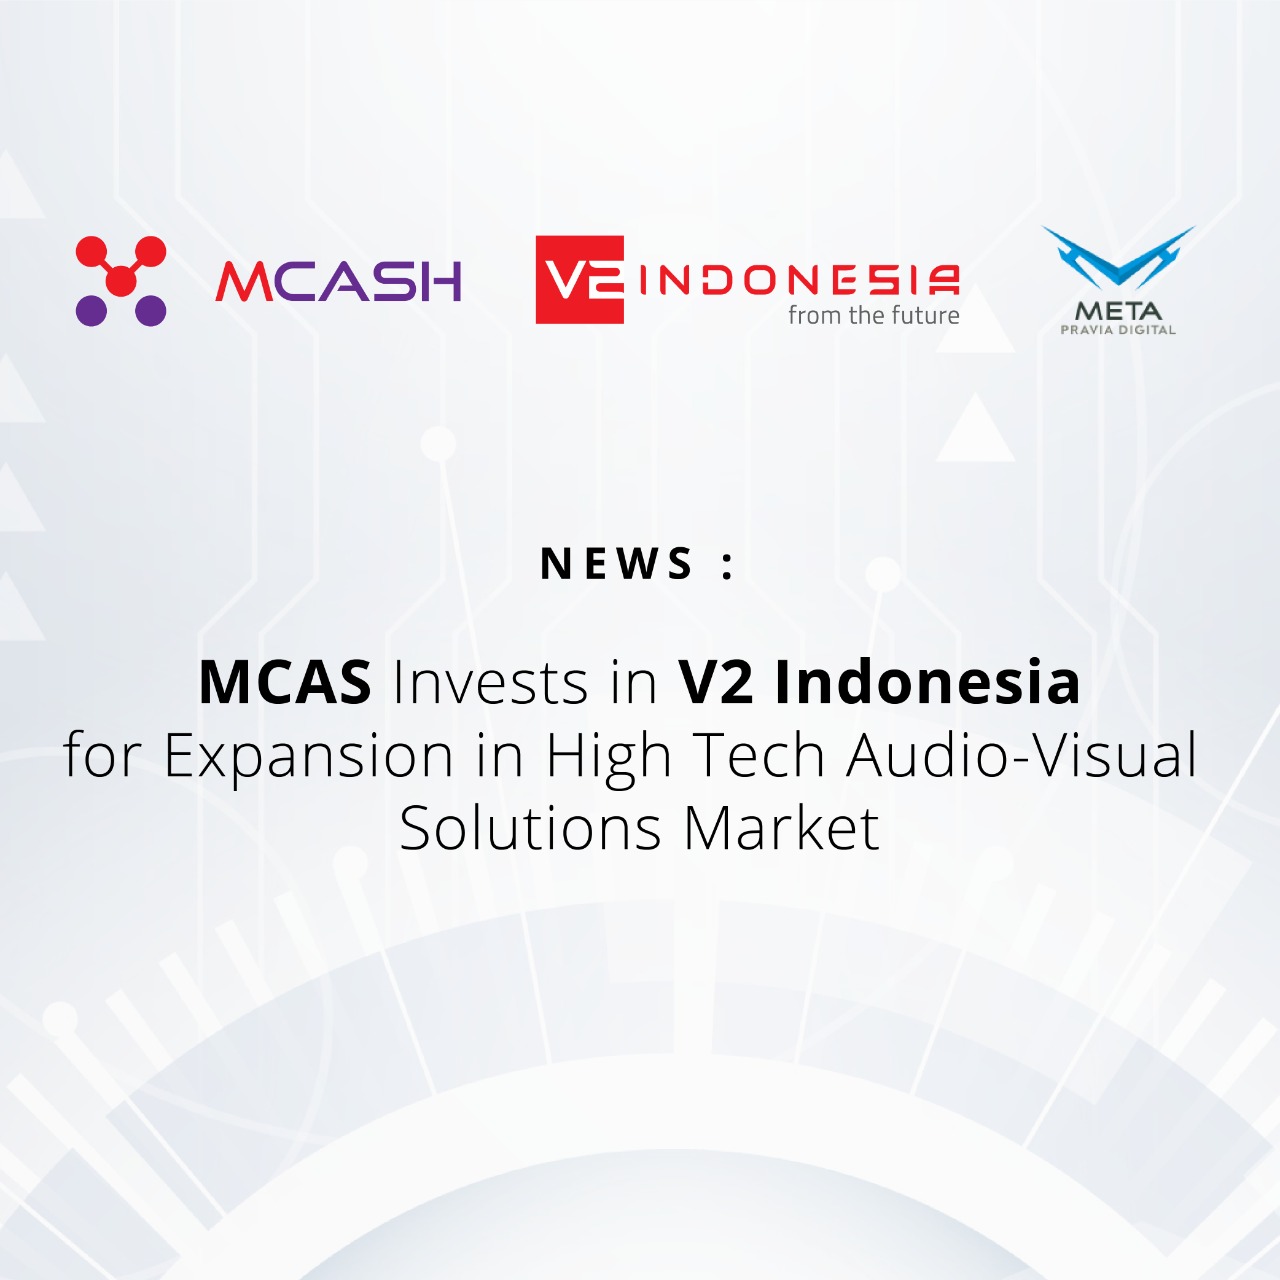 MCAS Invests in V2 Indonesia for Expansion in High Tech Audio-Visual Solutions Market